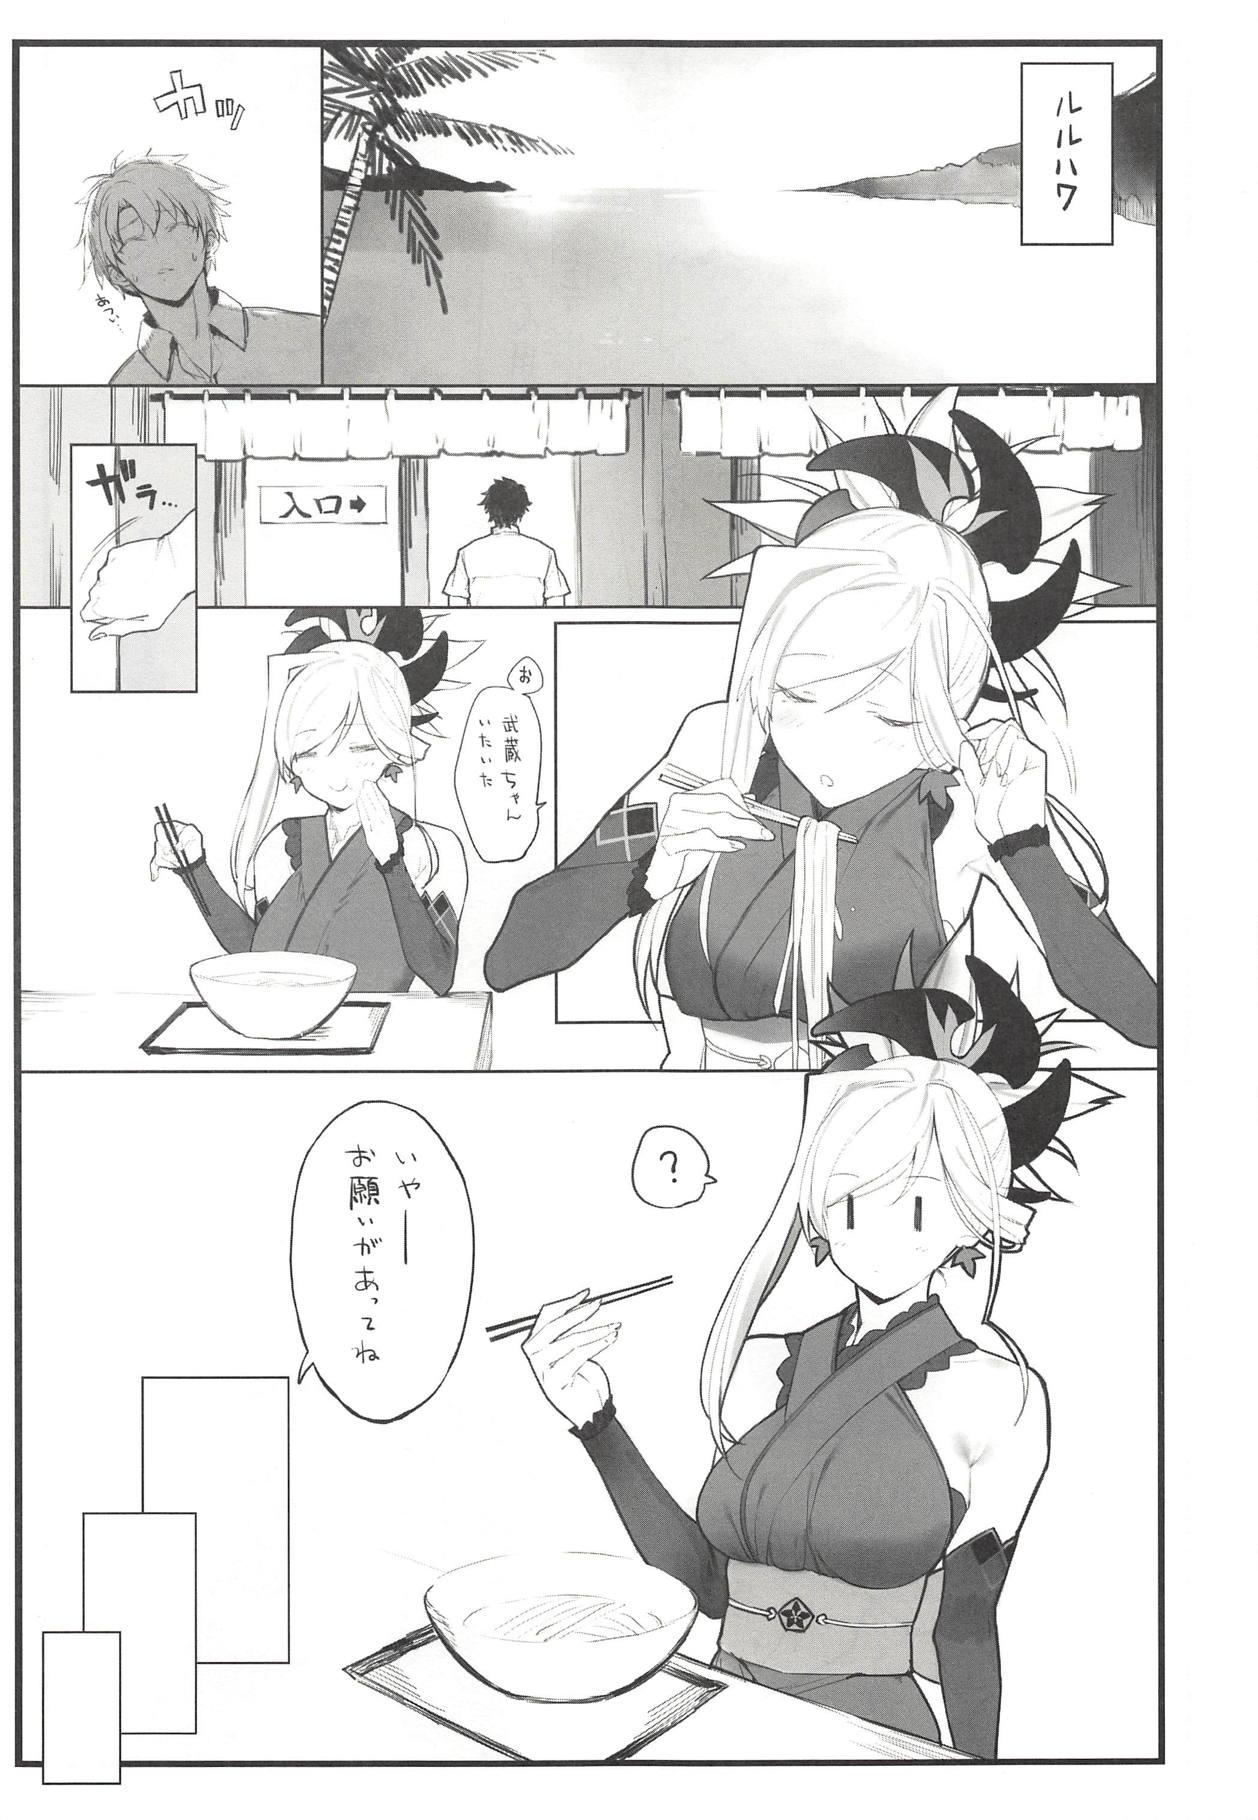 Colombian Musashi-chan no Hon - Fate grand order Babe - Page 2